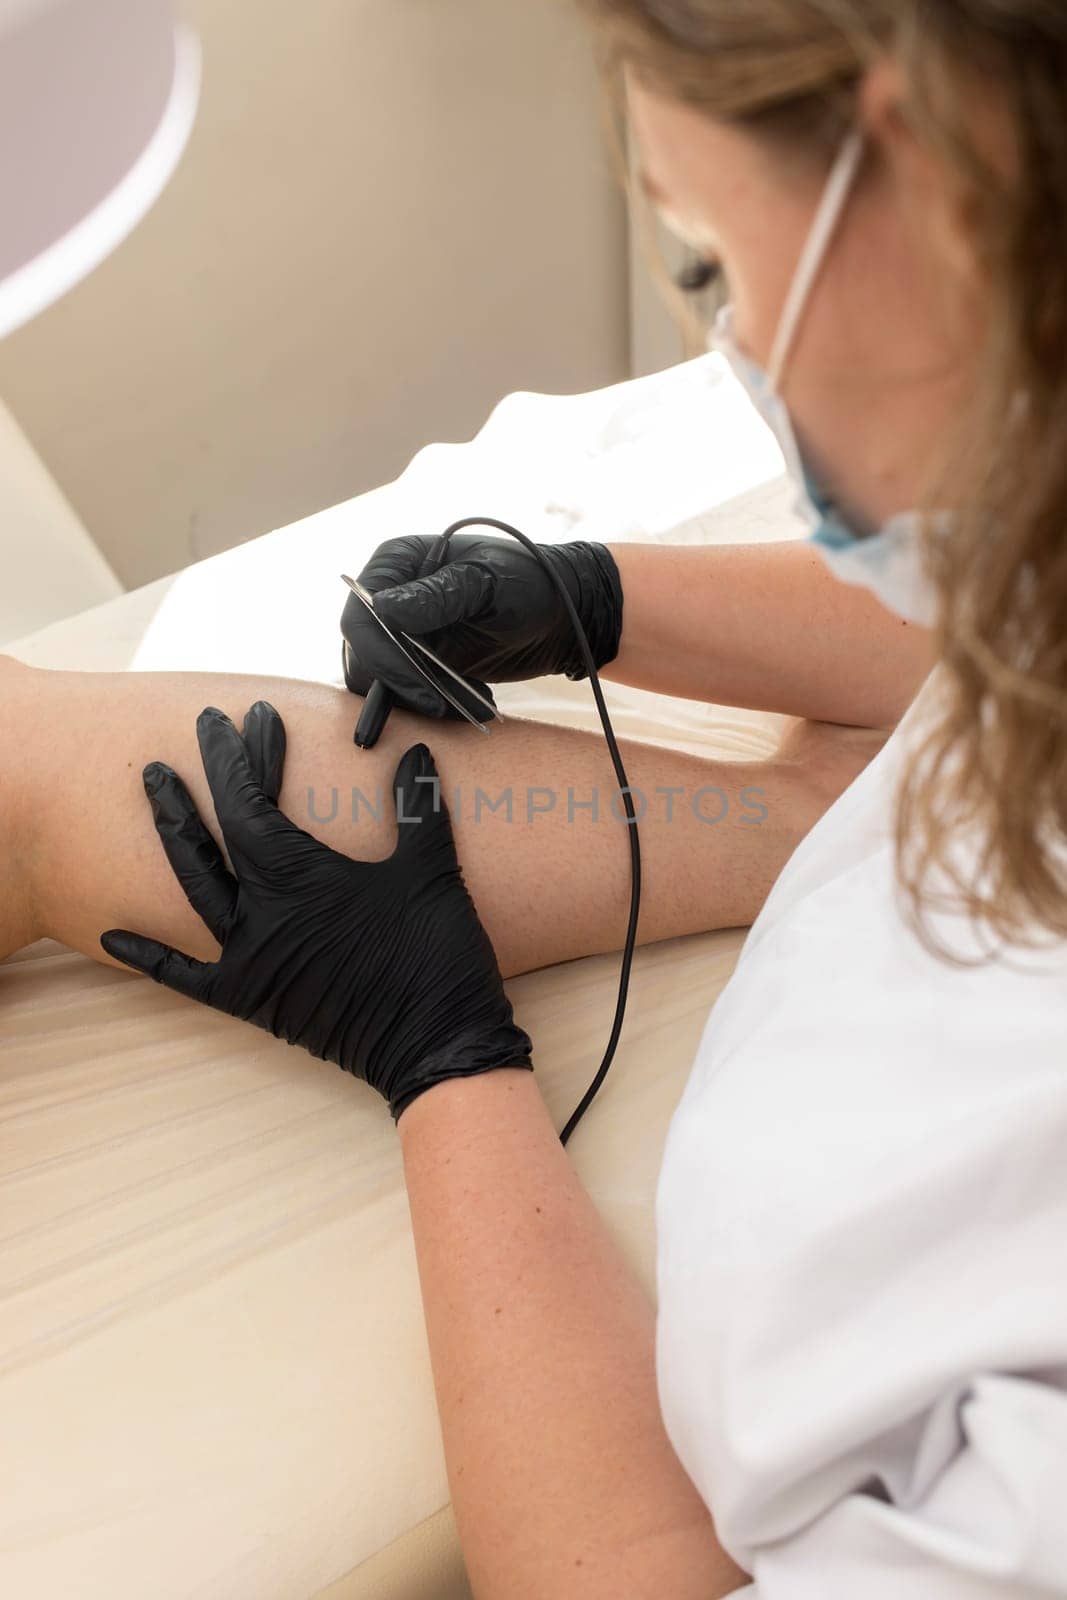 Dermatologist Doing Hair Removal Electrolysis Procedure On Woman's Leg, Shin. Electric Epilation In Beauty Salon. Vertical Plane. Authentic High quality photo